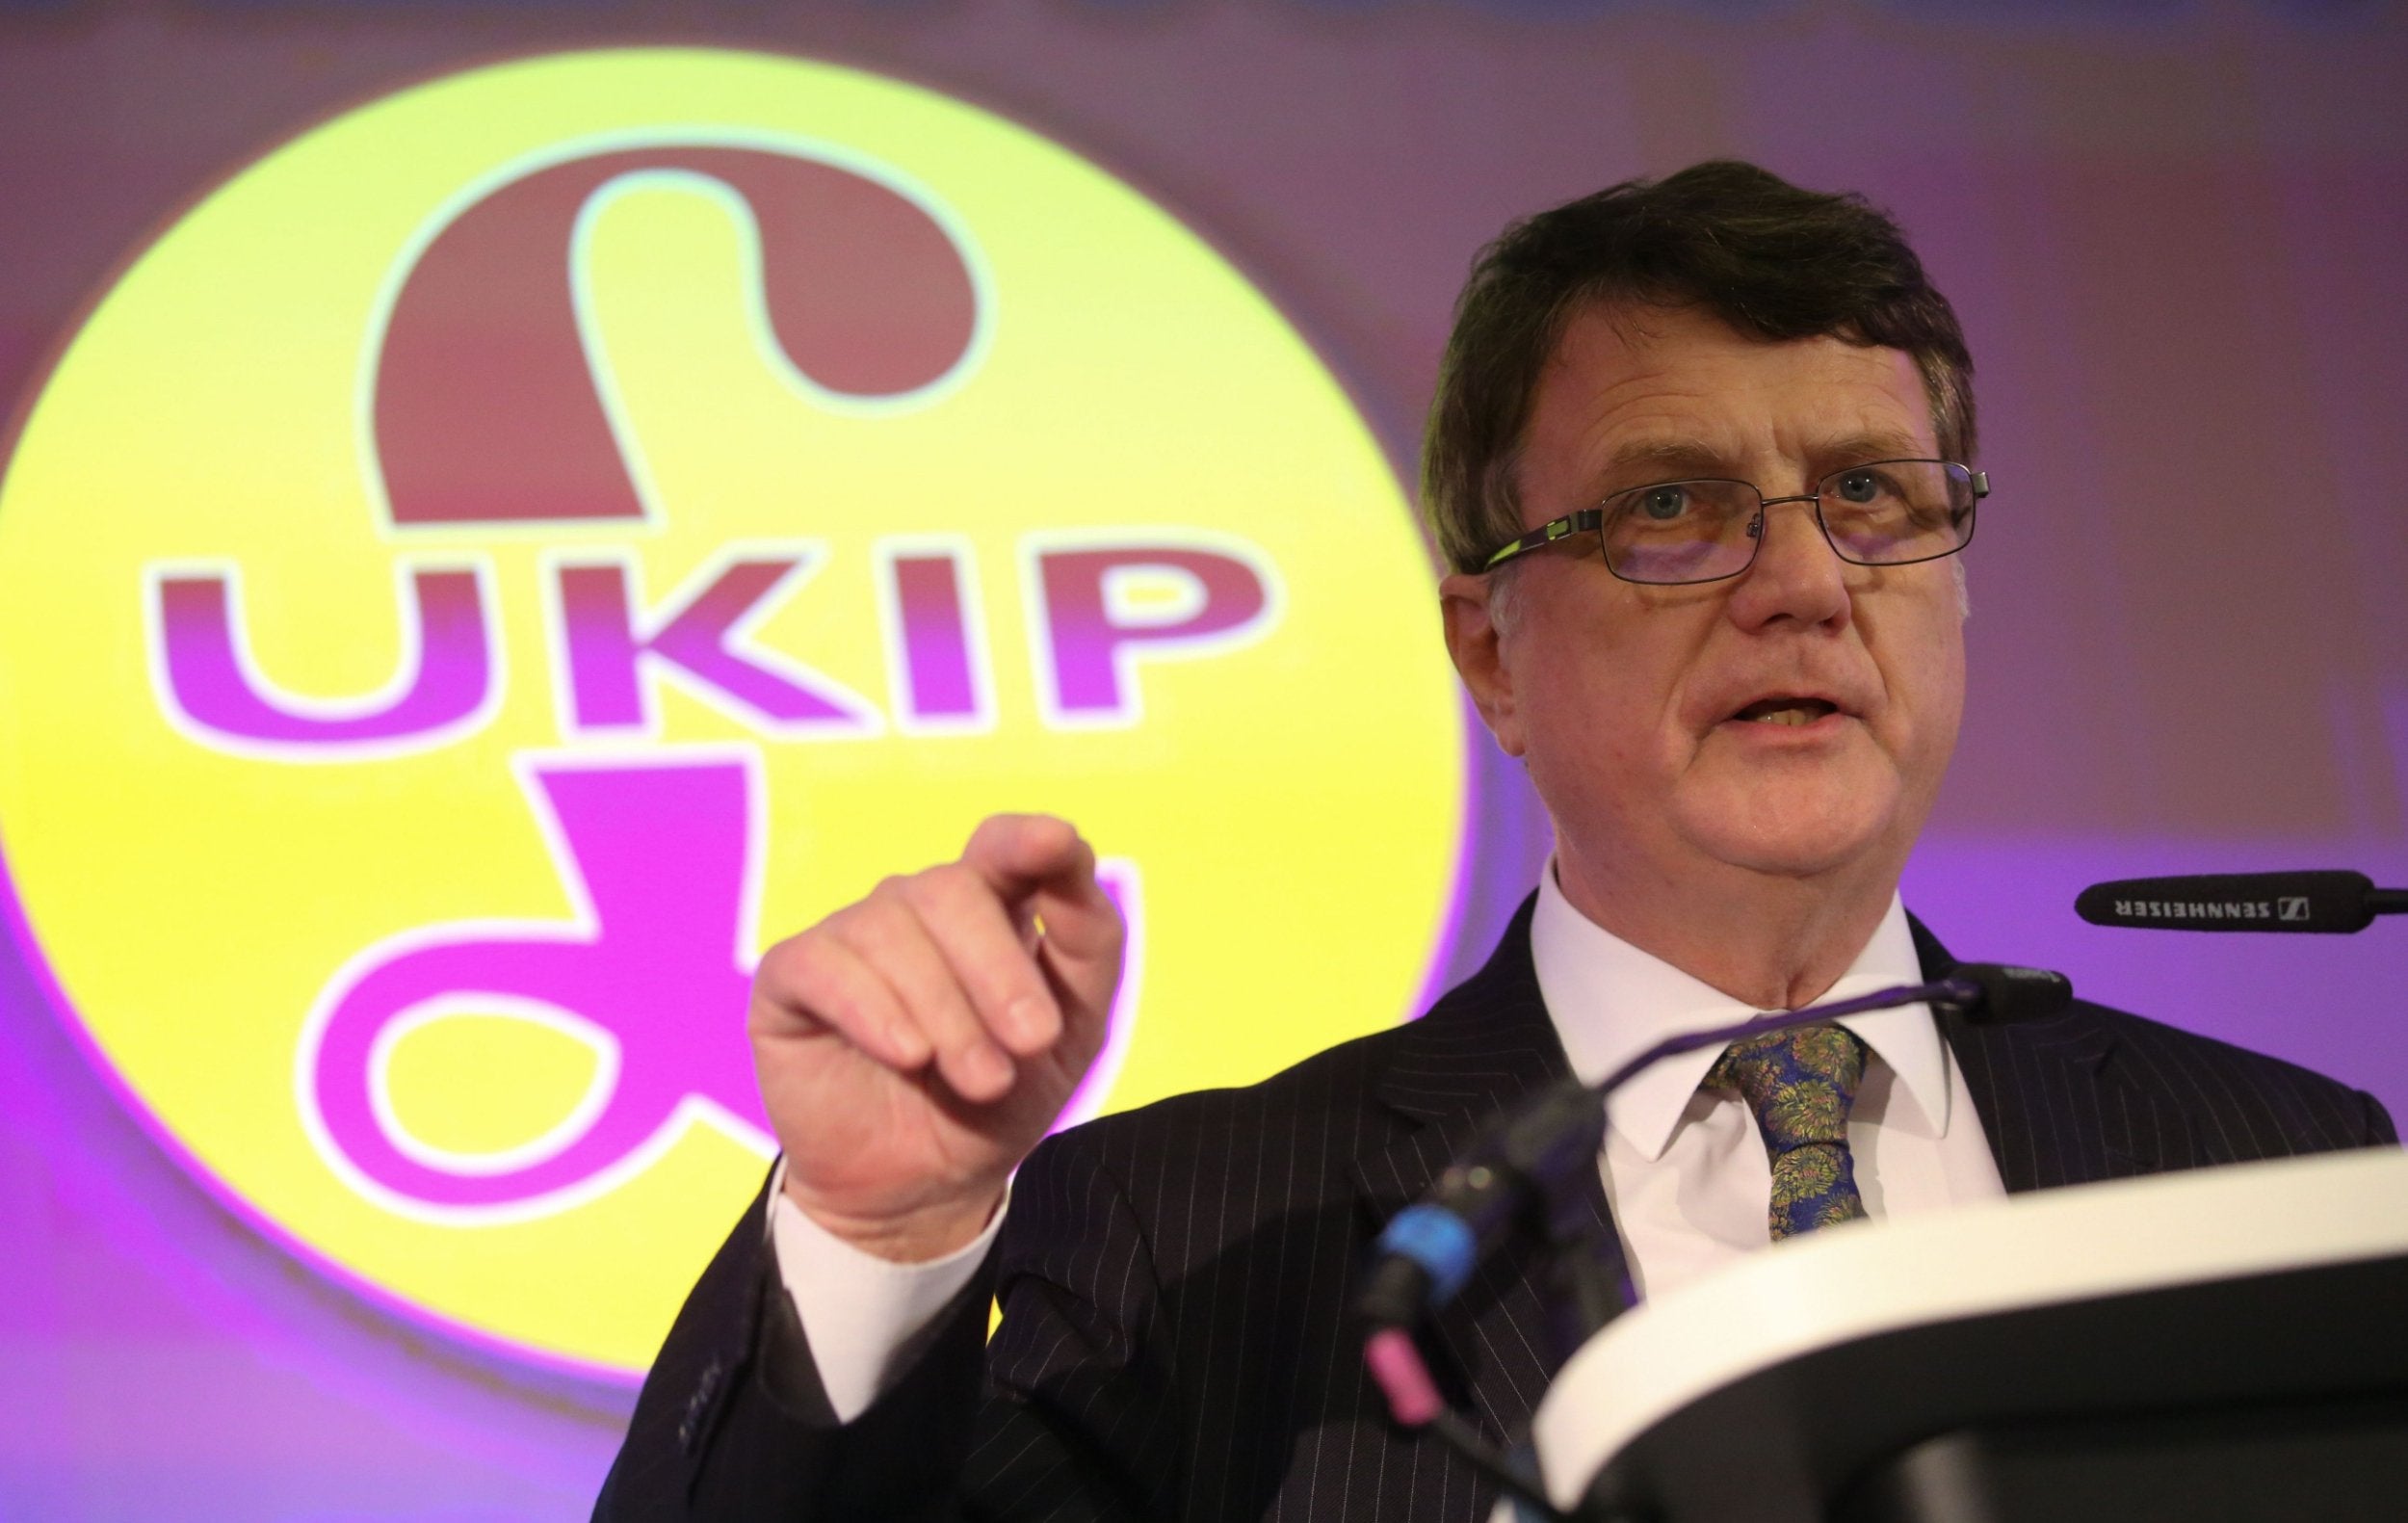 UK Independence Party (UKIP) leader Gerard Batten speaks during a press conference to launch the party's European Parliament election campaign